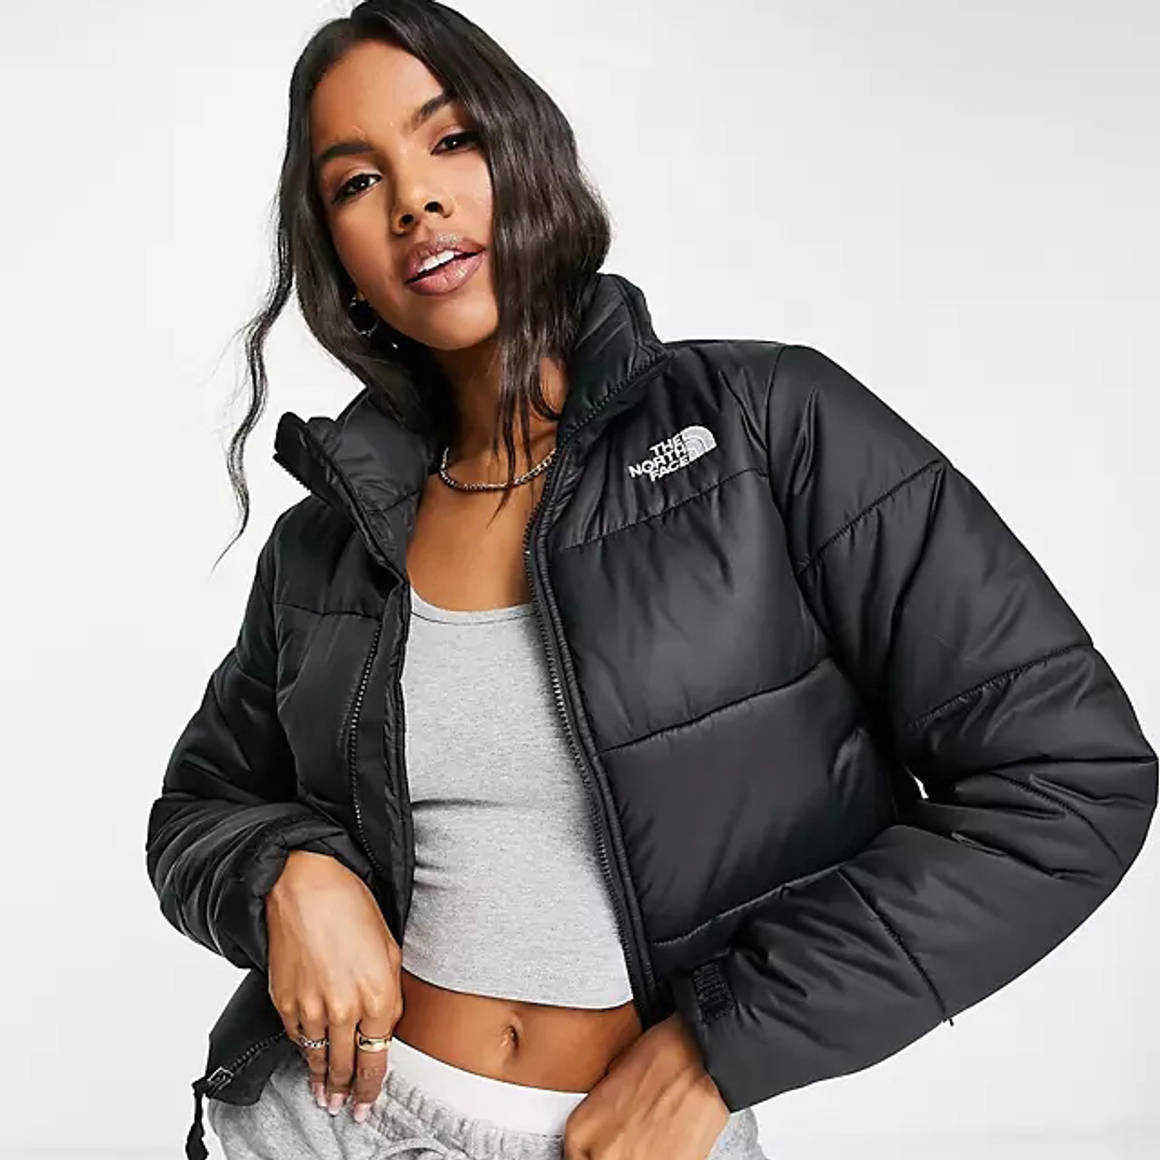 The North Face Pieces from the Hottest Brand of the Moment: The 